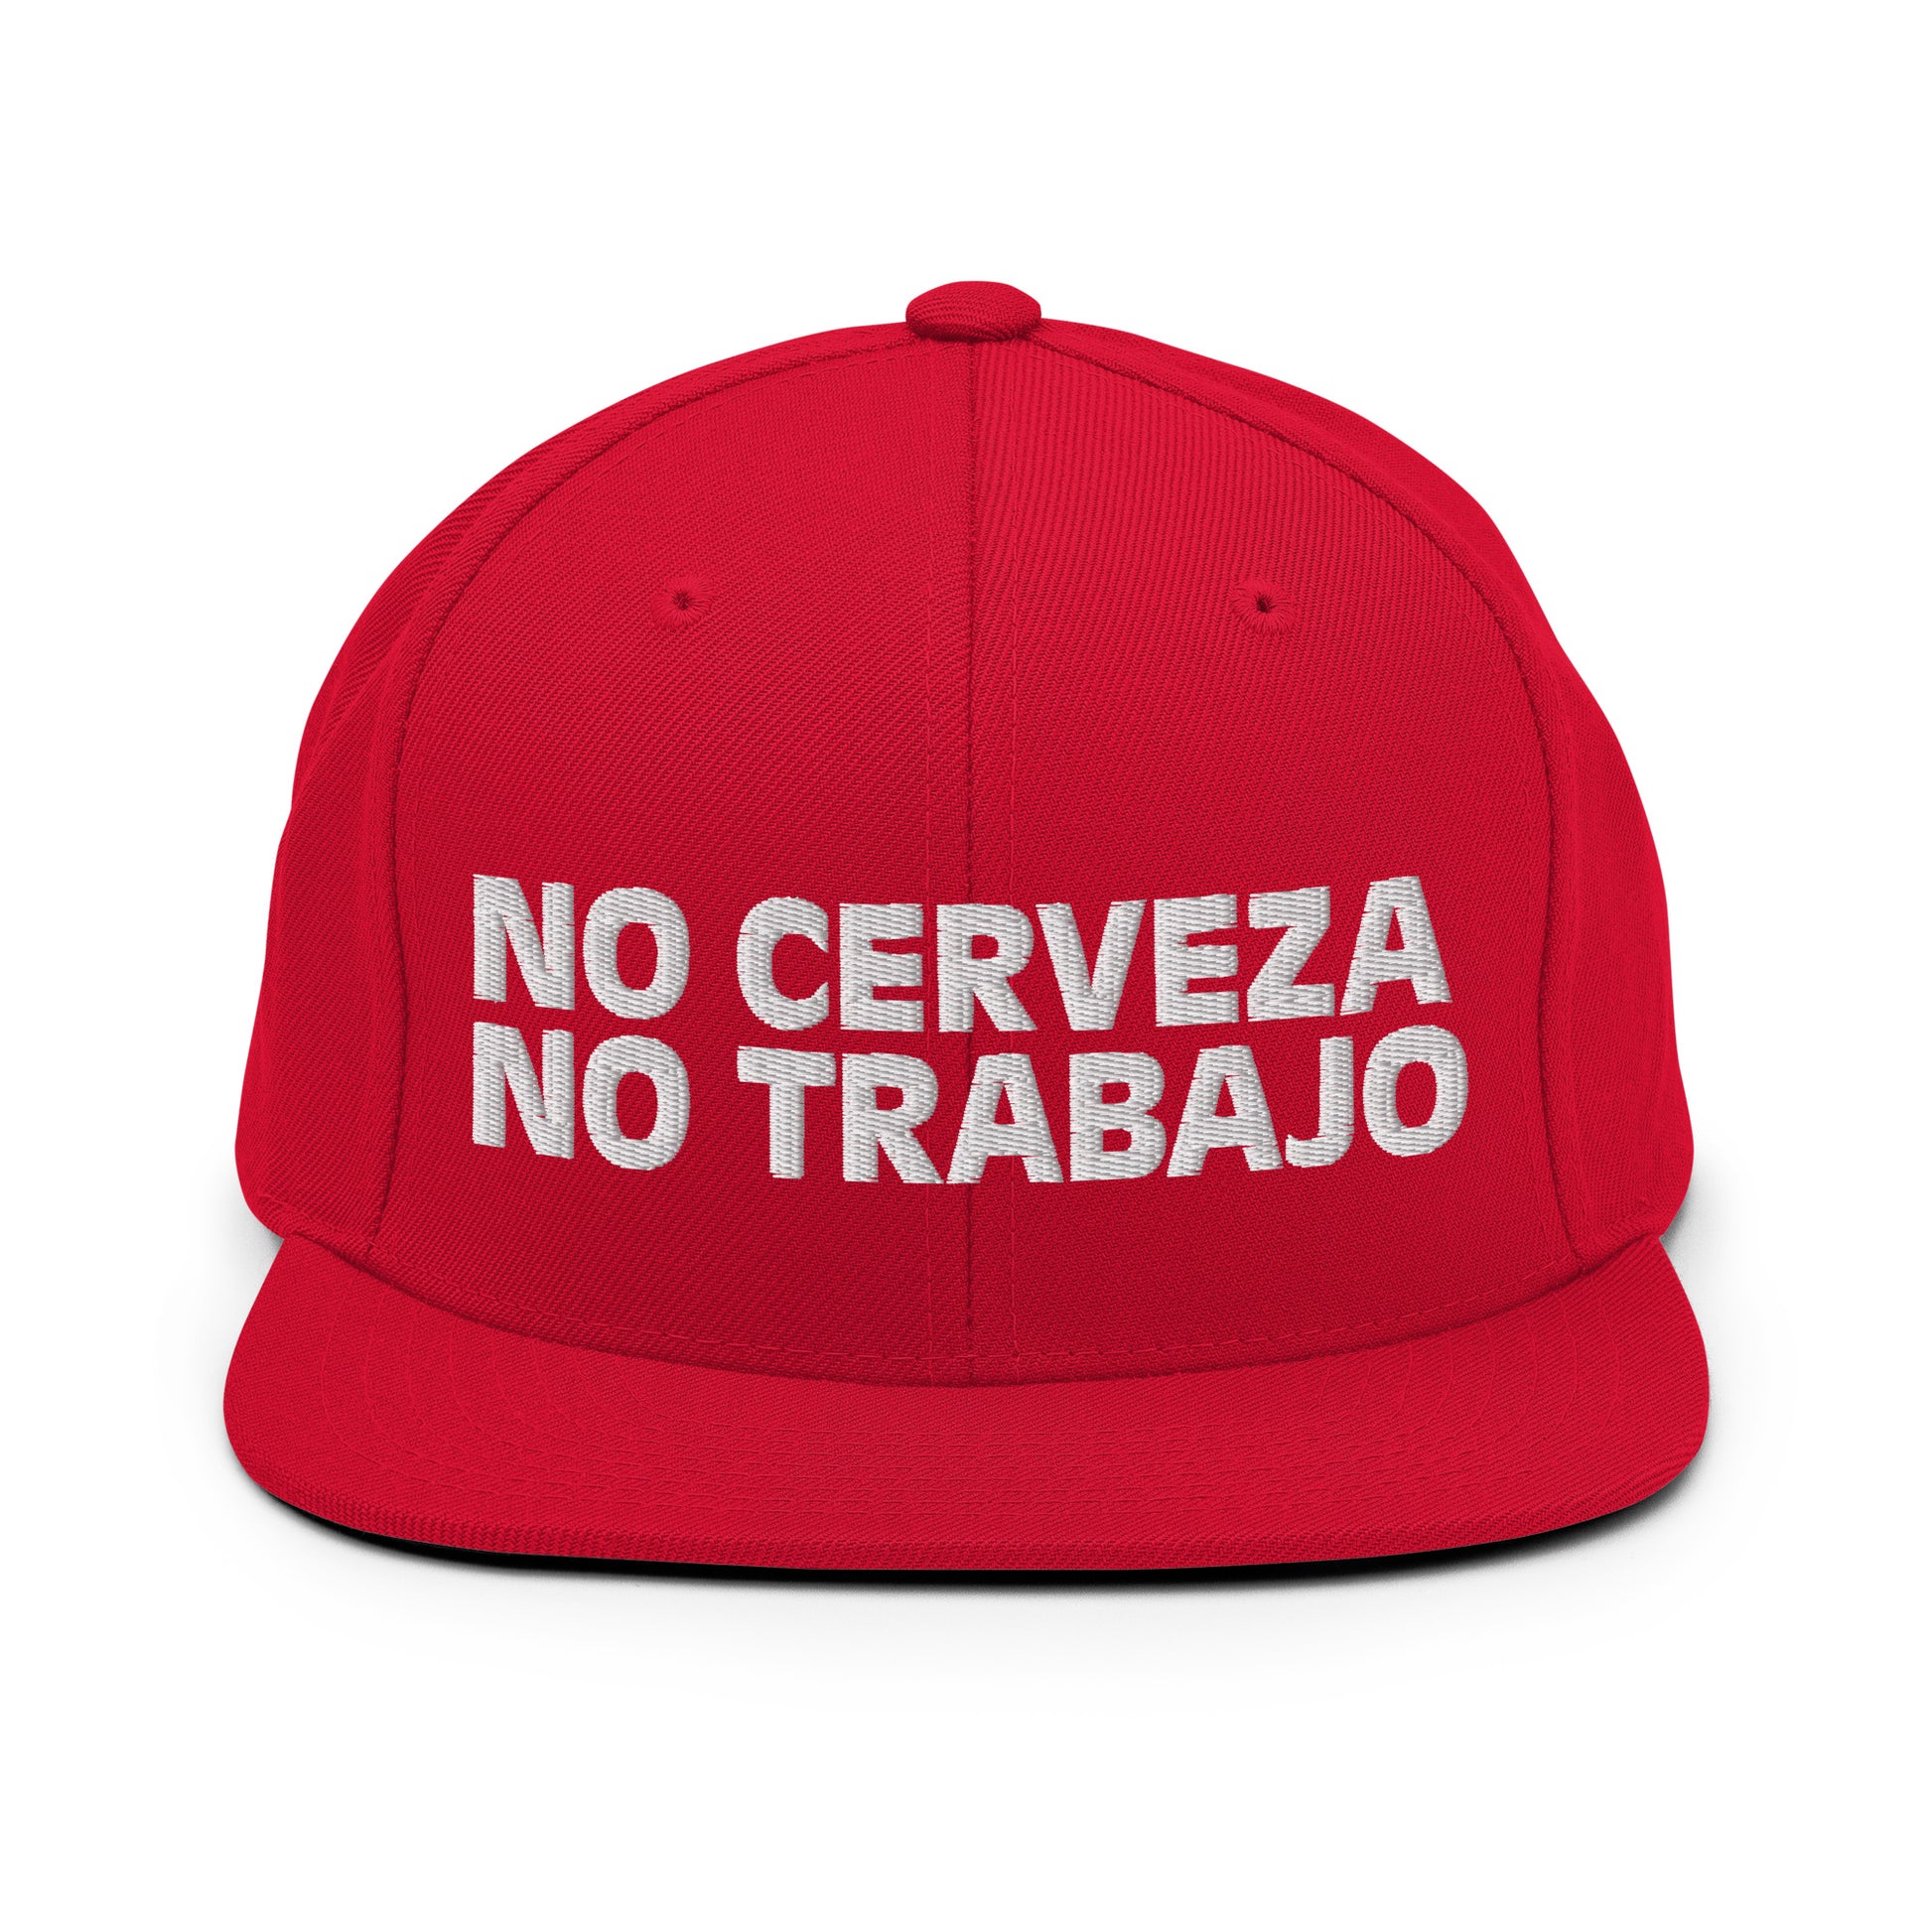 Red snapback hat with "No Cerveza No Trabajo" text in white, adjustable fit, inspired by a comedy starring a Chicano comedian. Ideal for men, showcases "No Cerveza No Trabajo" meaning.